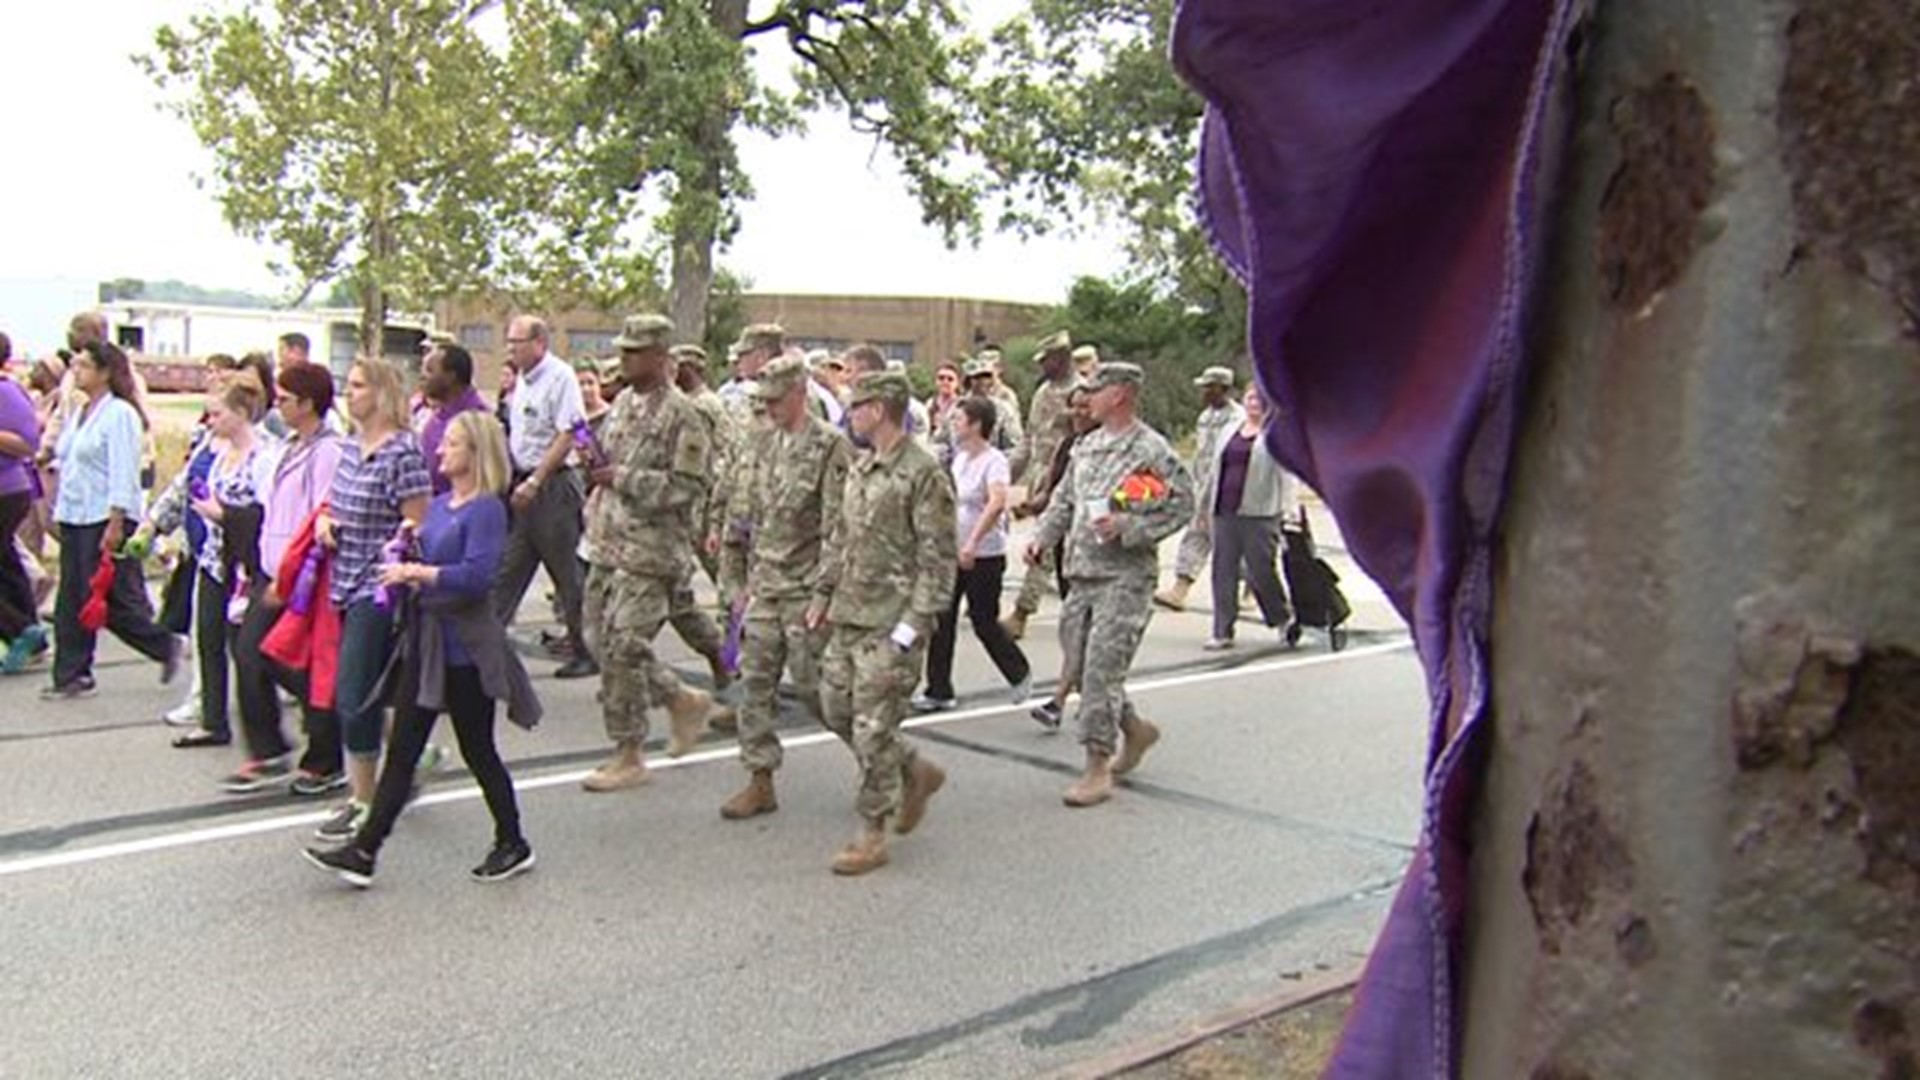 Arsenal workers march to raise domestic violence awareness